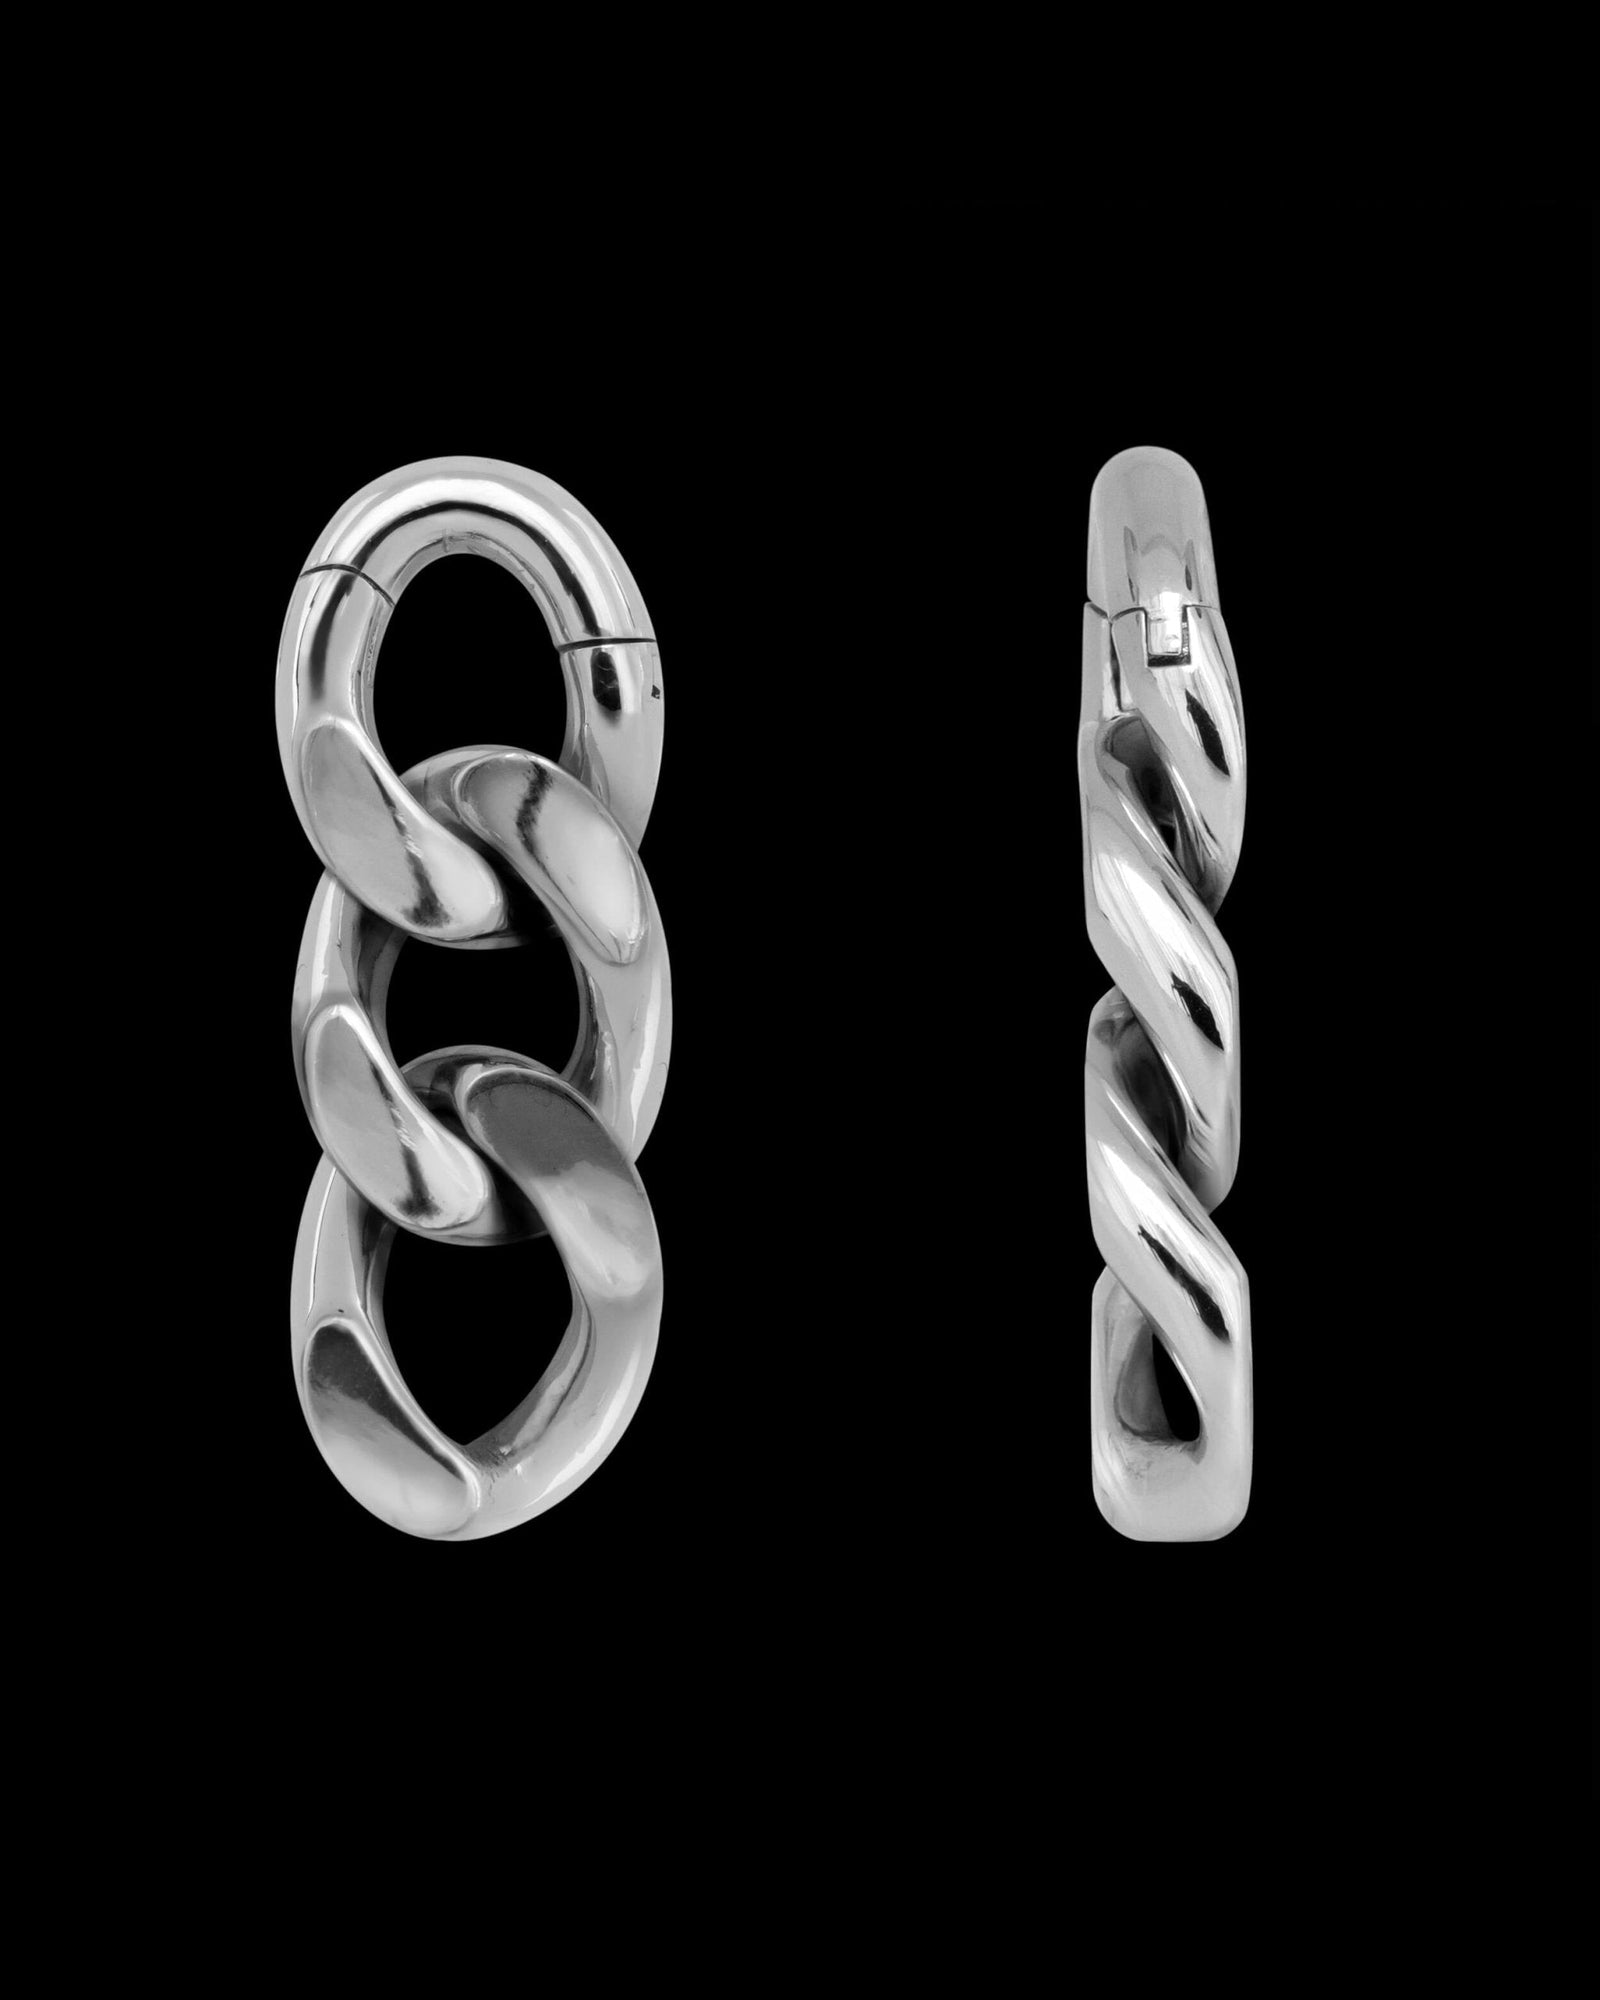 Sable Chain Hangers - Hangers - Ask and Embla